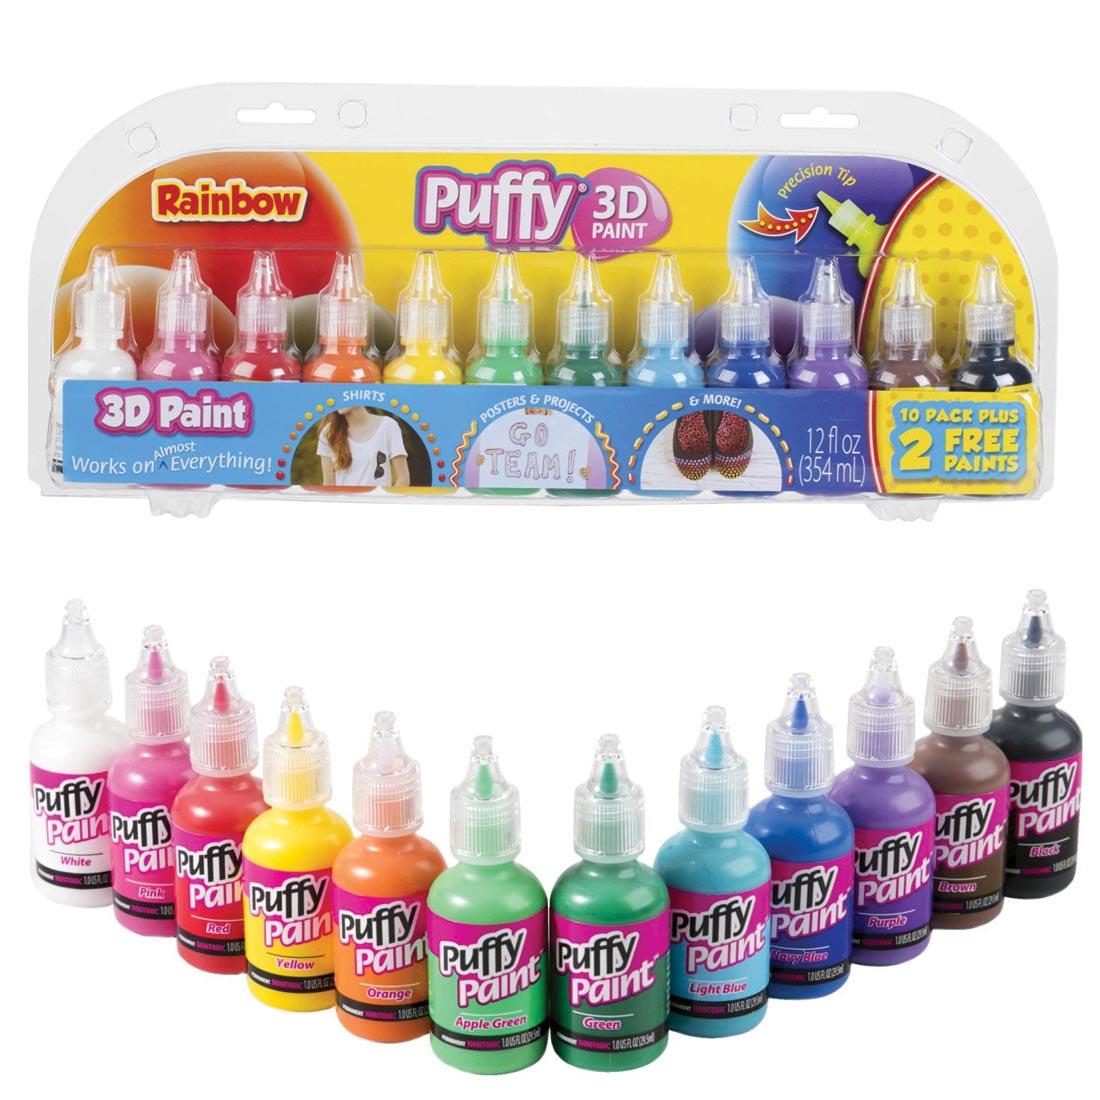 Puffy 3D Paint 12-Color Set Shown Both In and Out of Package